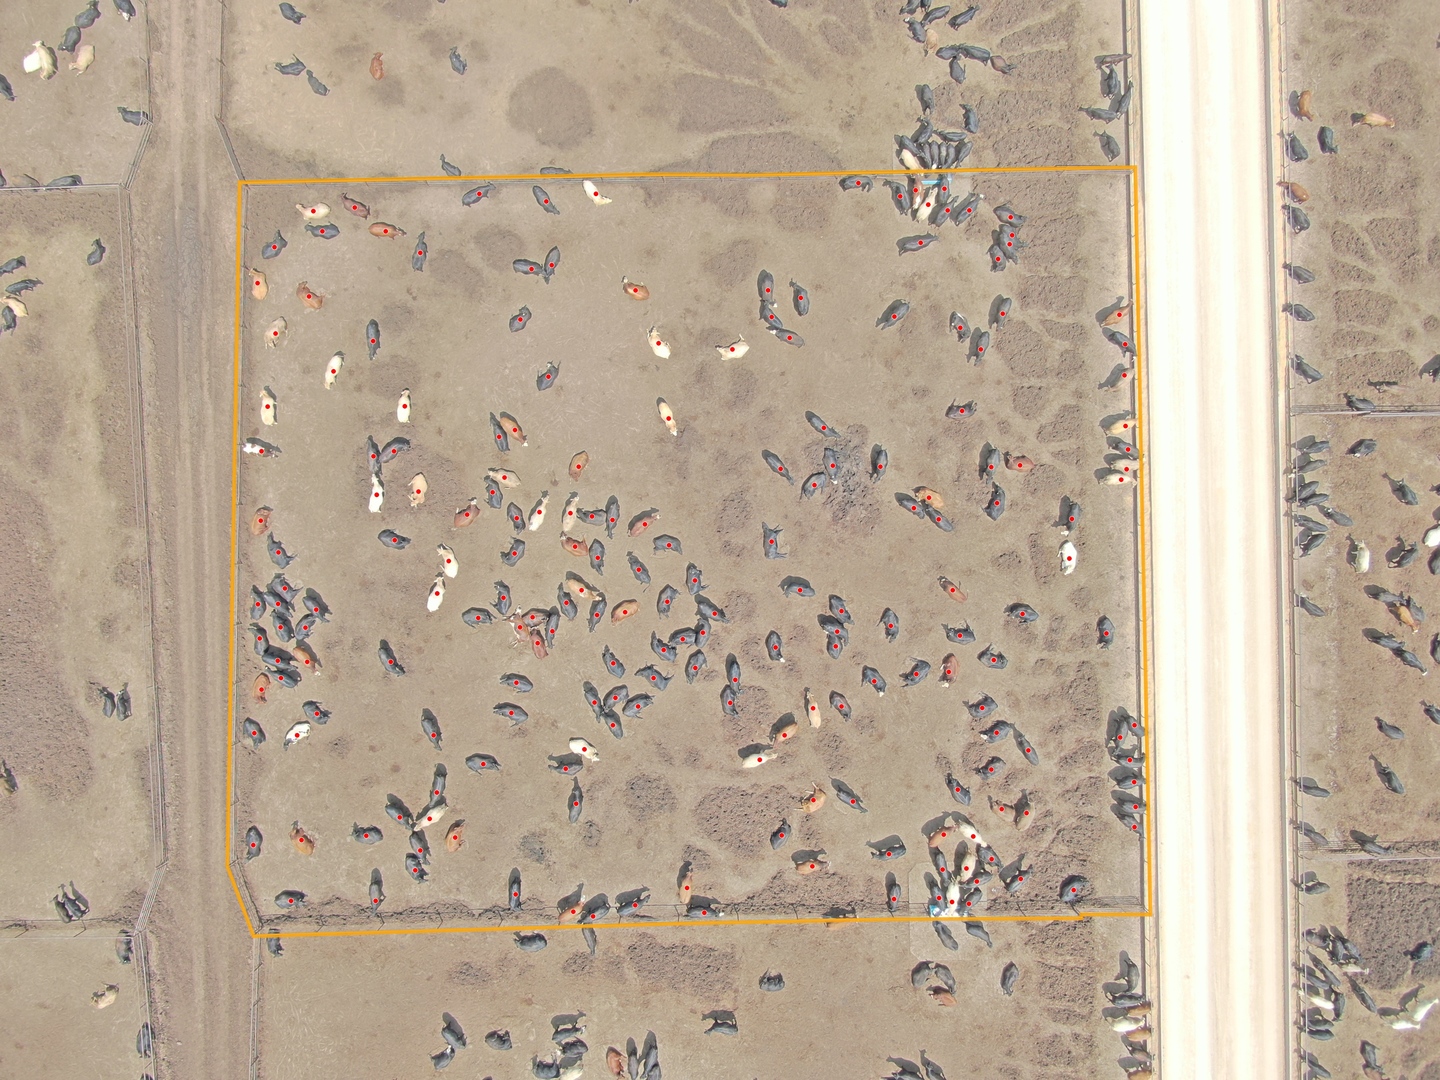 Aerial view of cattle counted by drone